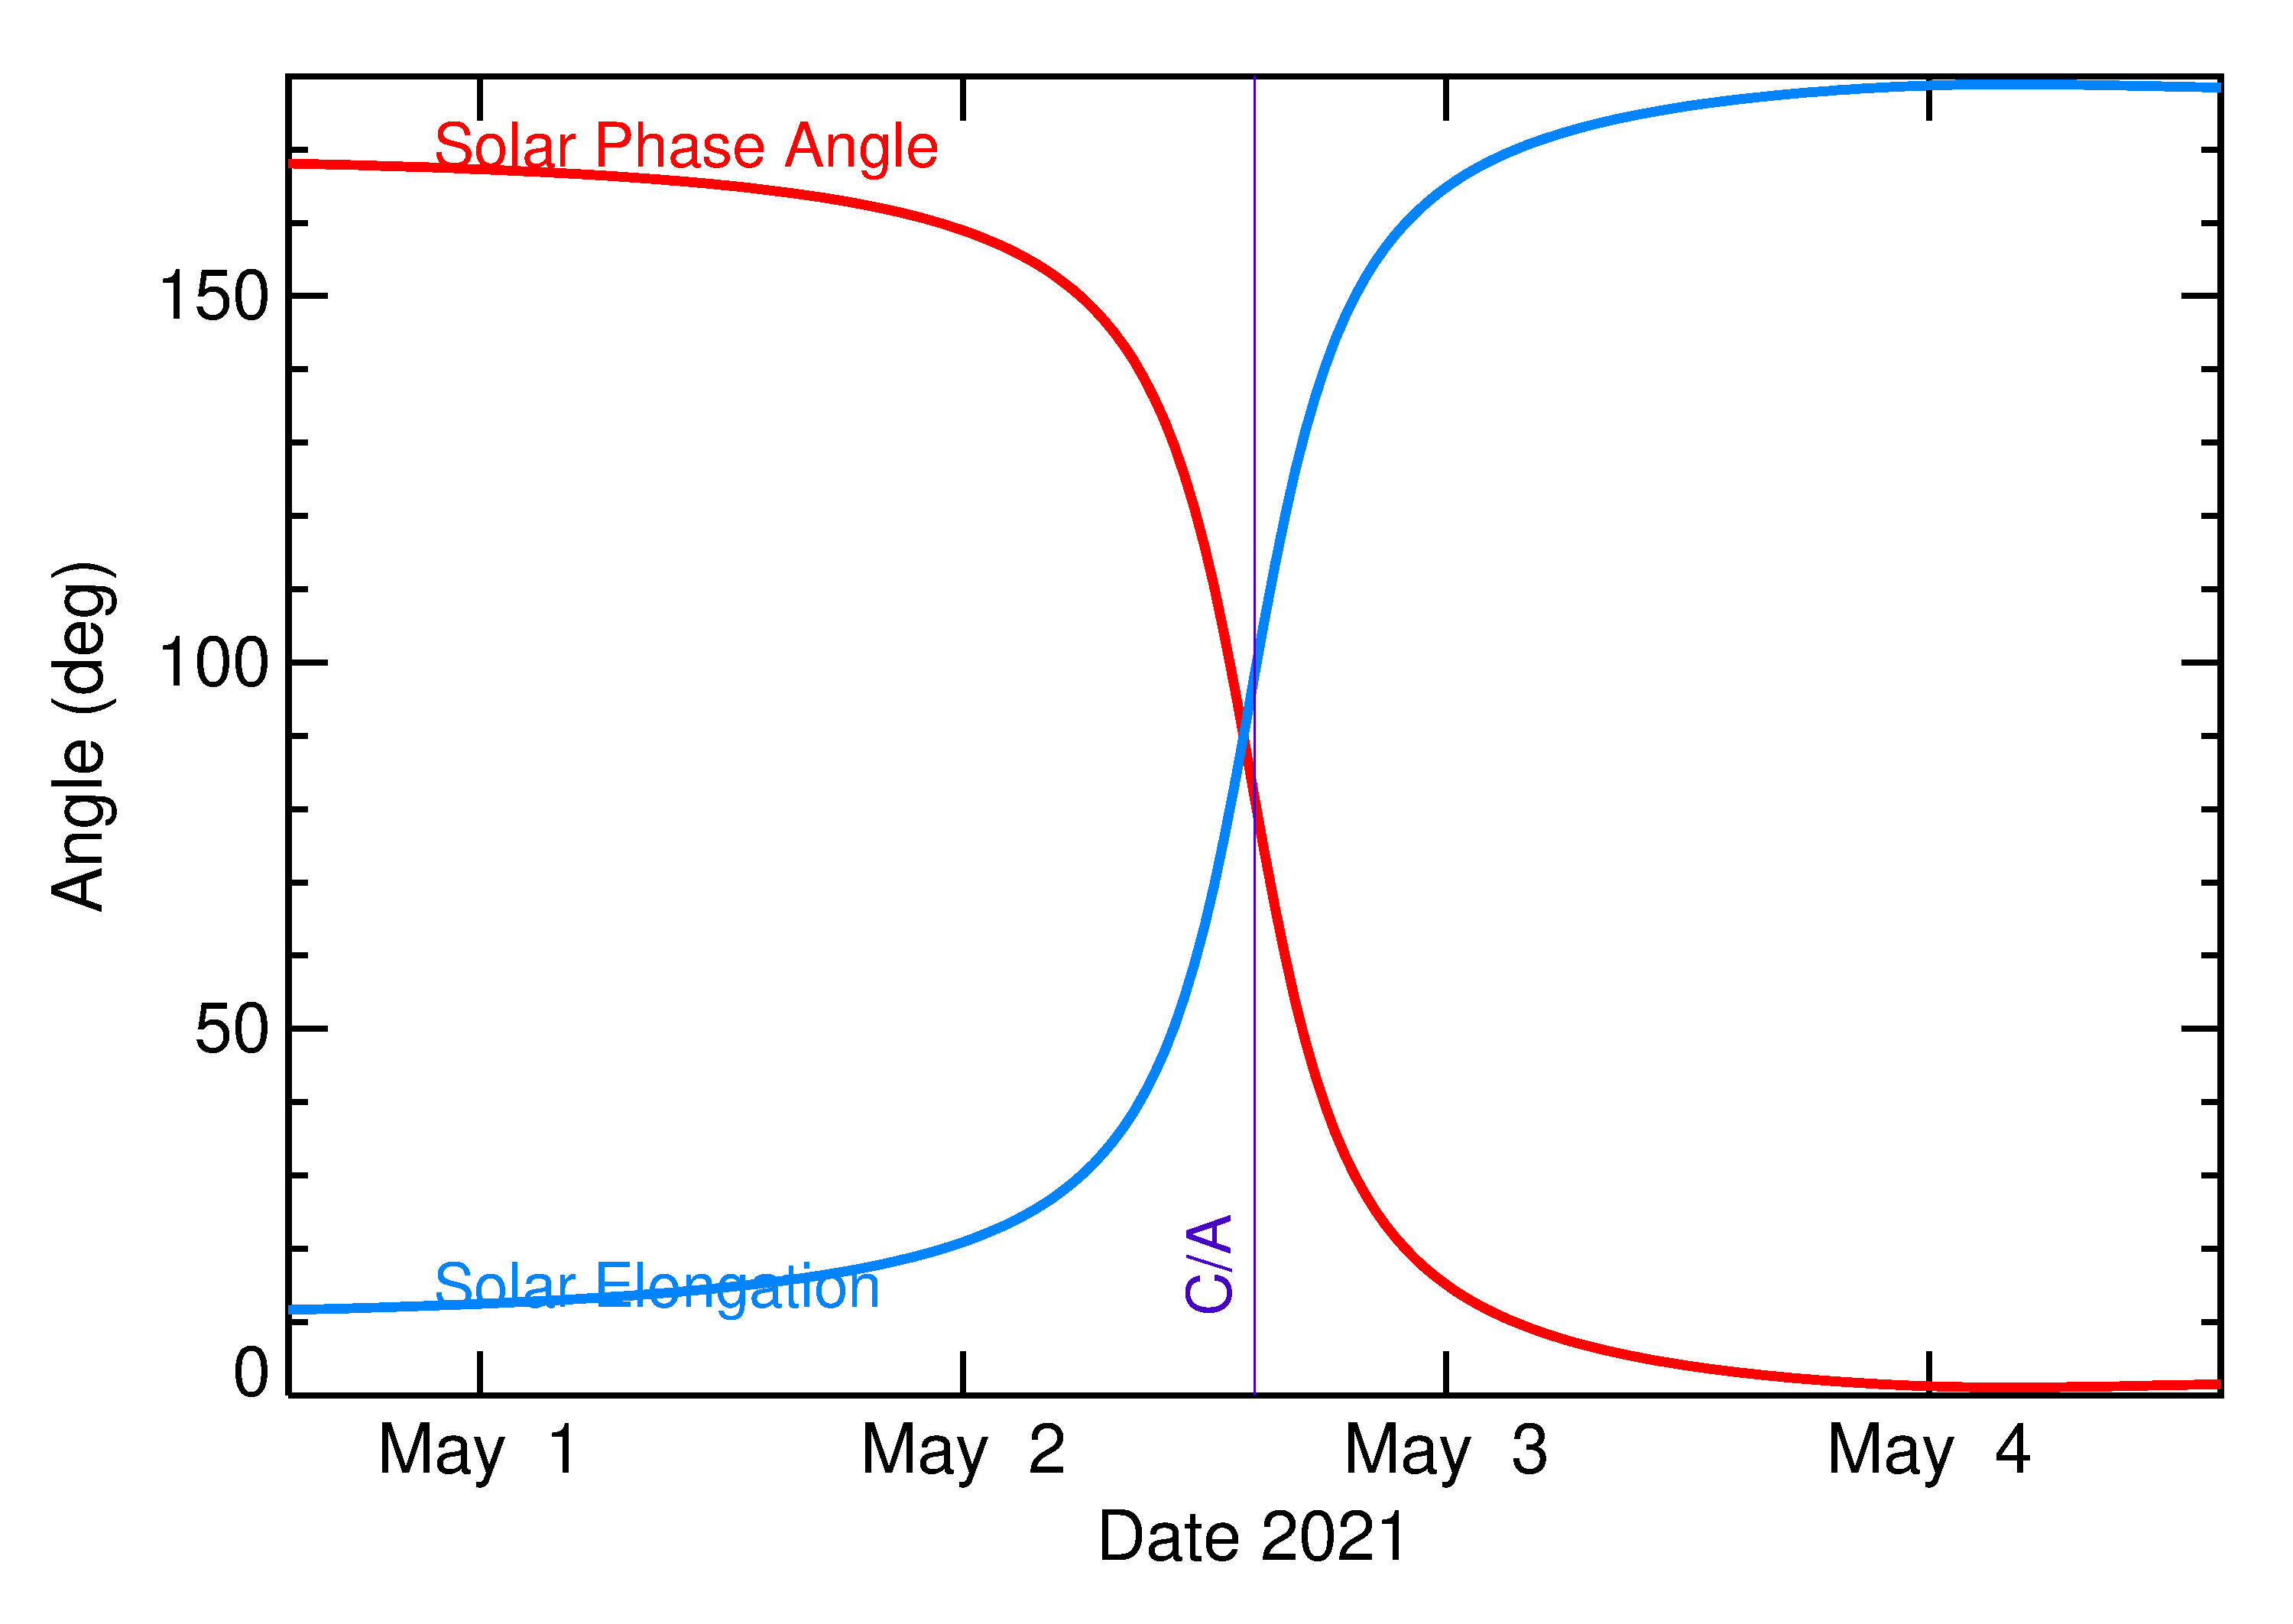 Solar Elongation and Solar Phase Angle of 2021 JW in the days around closest approach